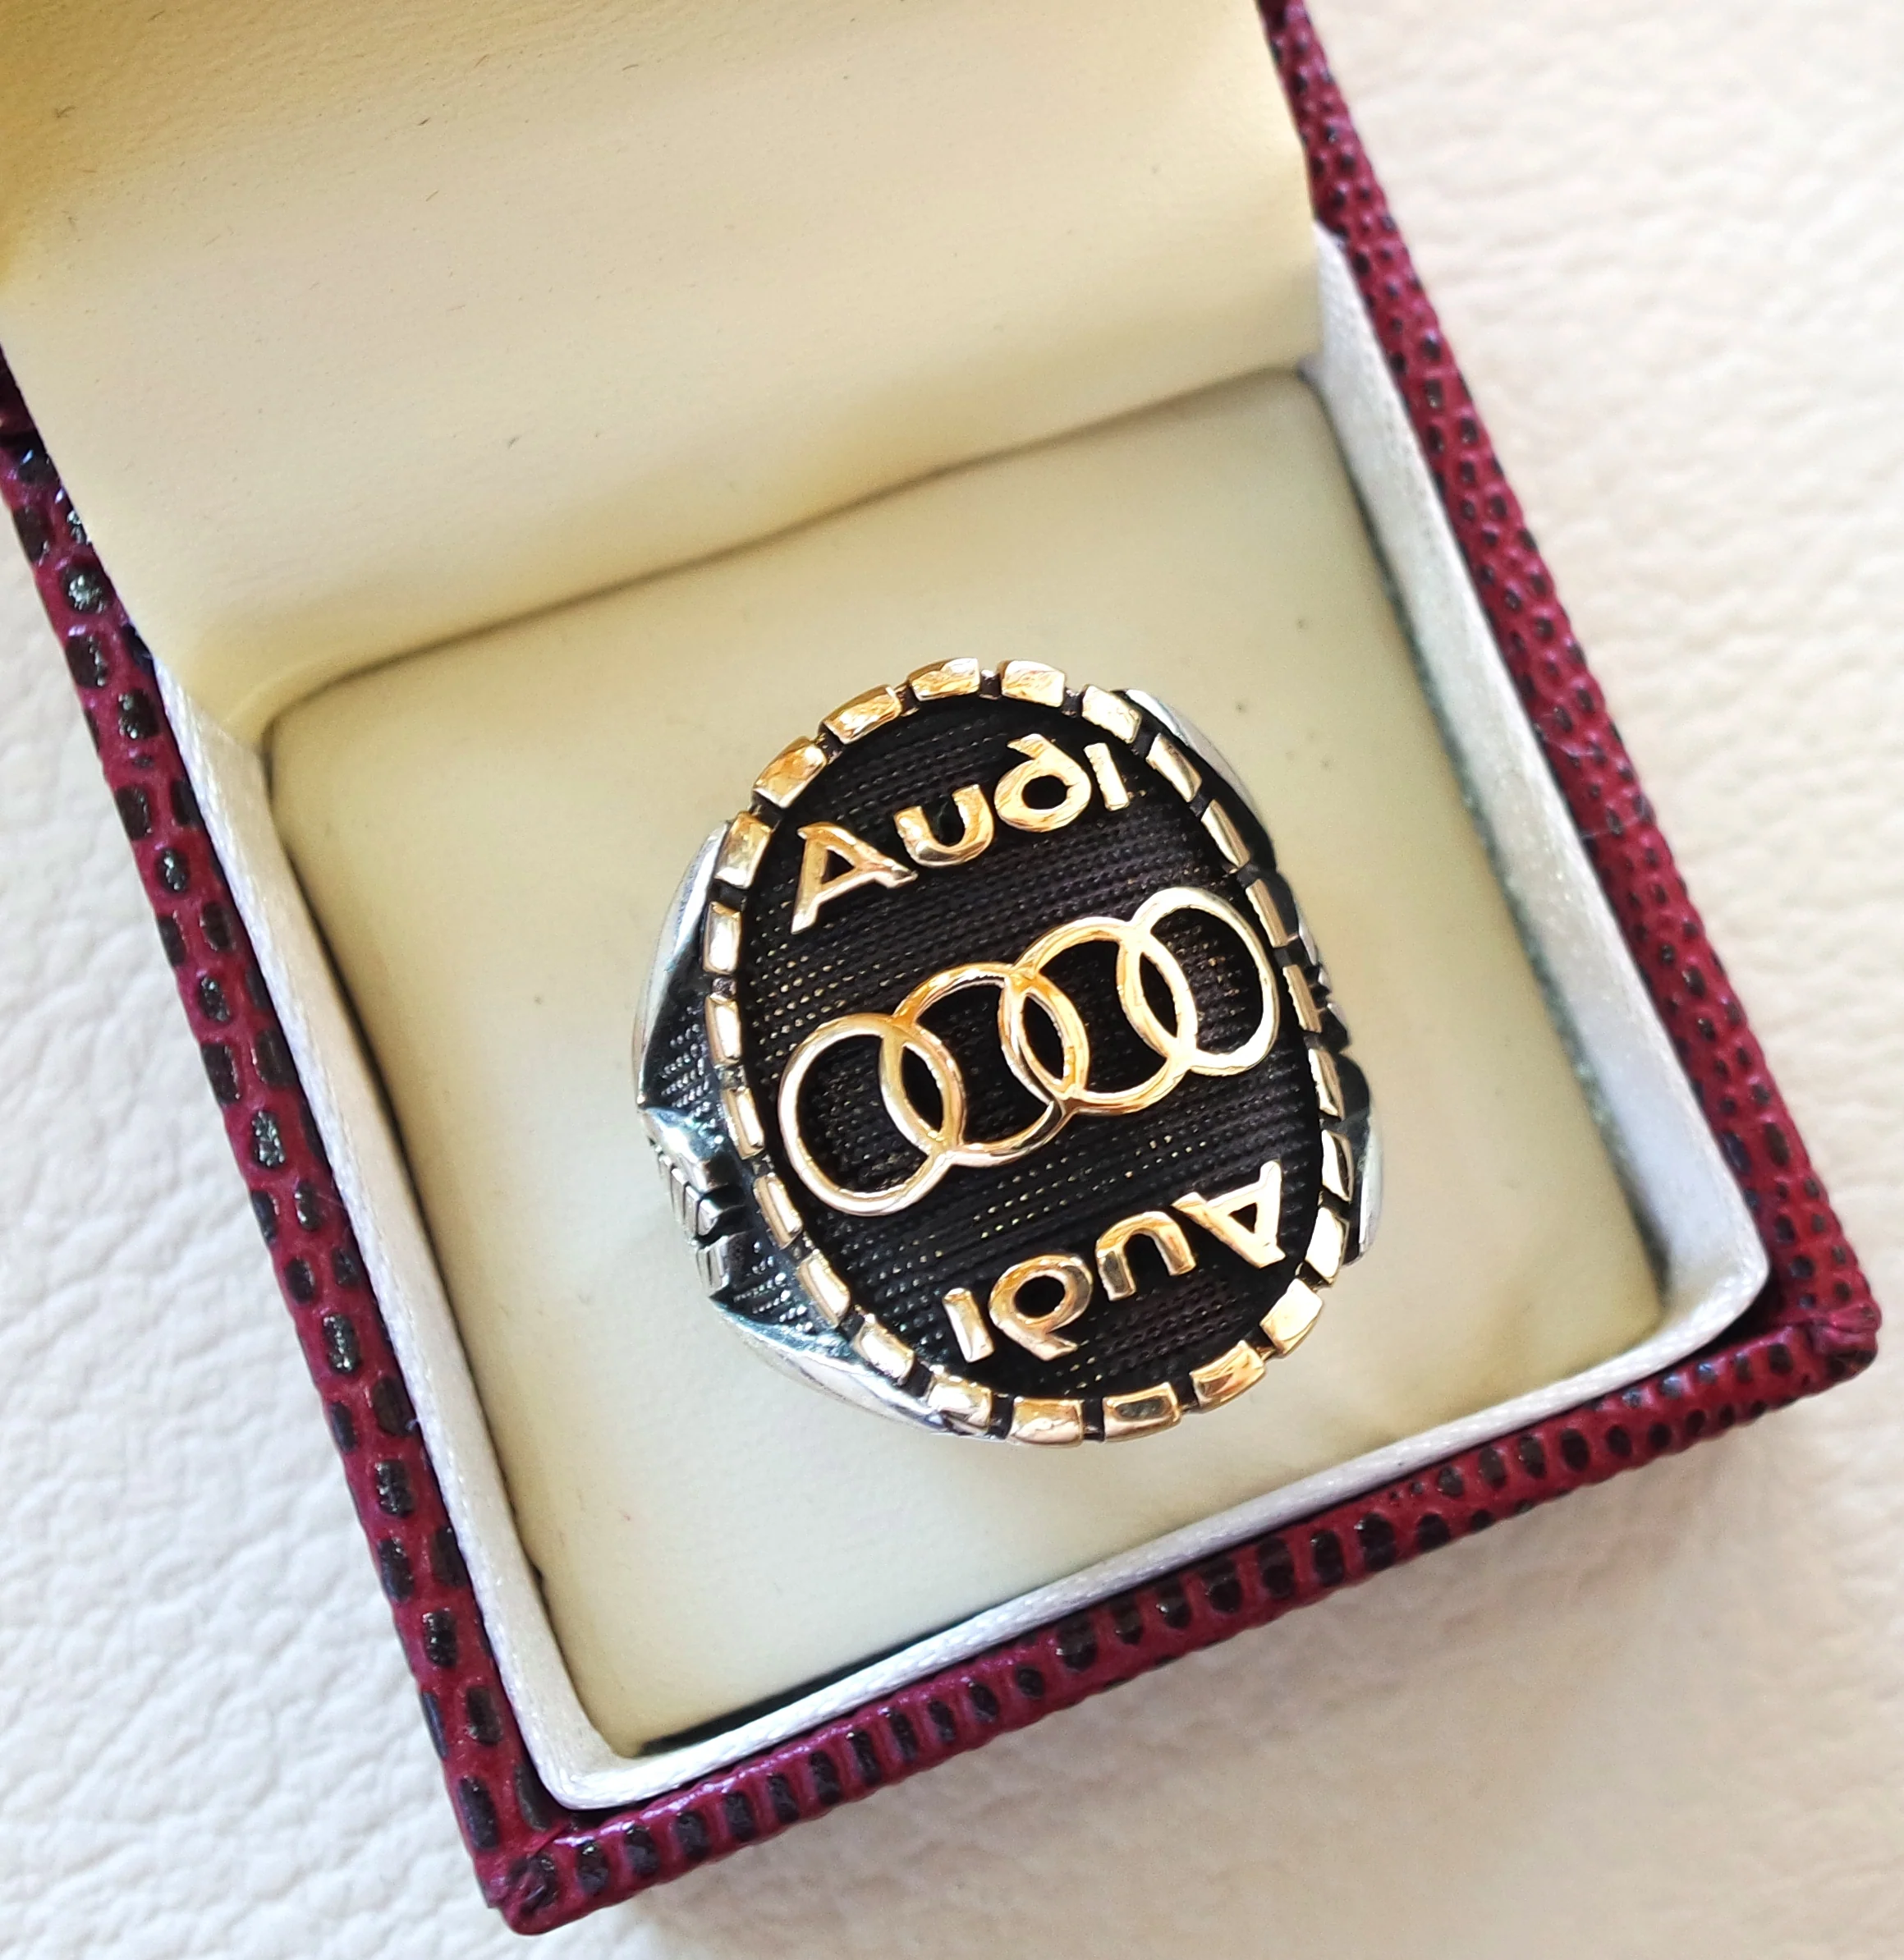 Audi sterling silver 925 and bronze heavy man ring new car ideal